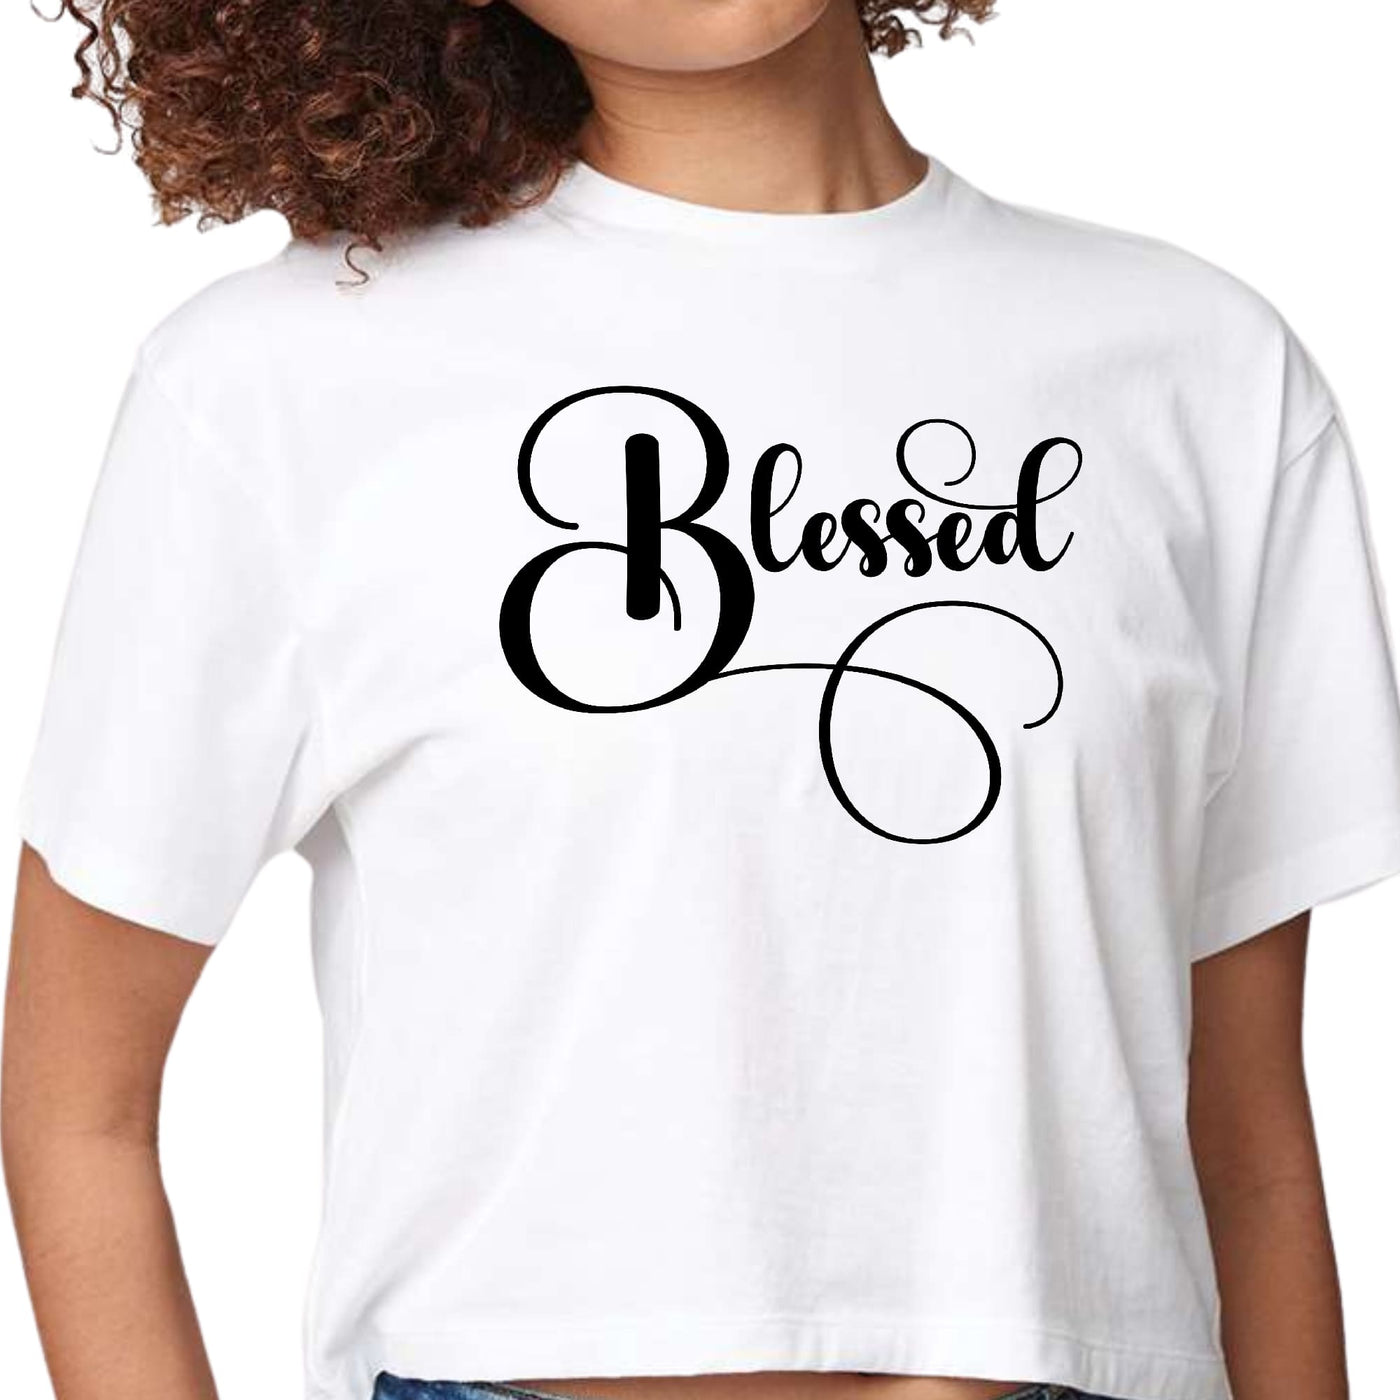 Womens Cropped Graphic T-shirt Blessed Black Graphic Illustration - Womens